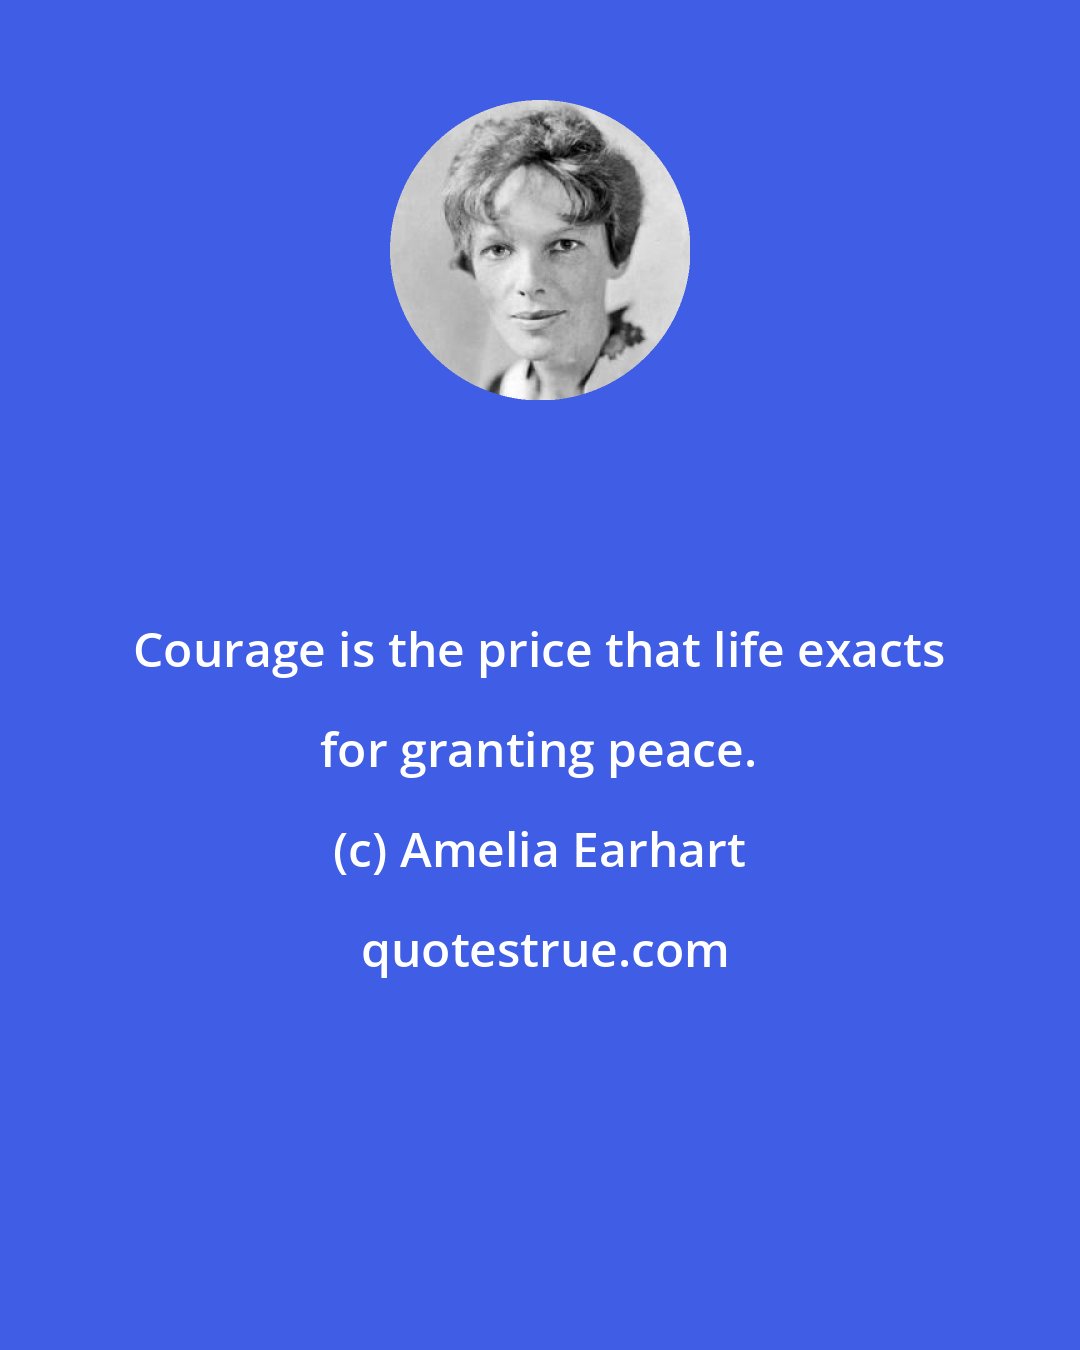 Amelia Earhart: Courage is the price that life exacts for granting peace.